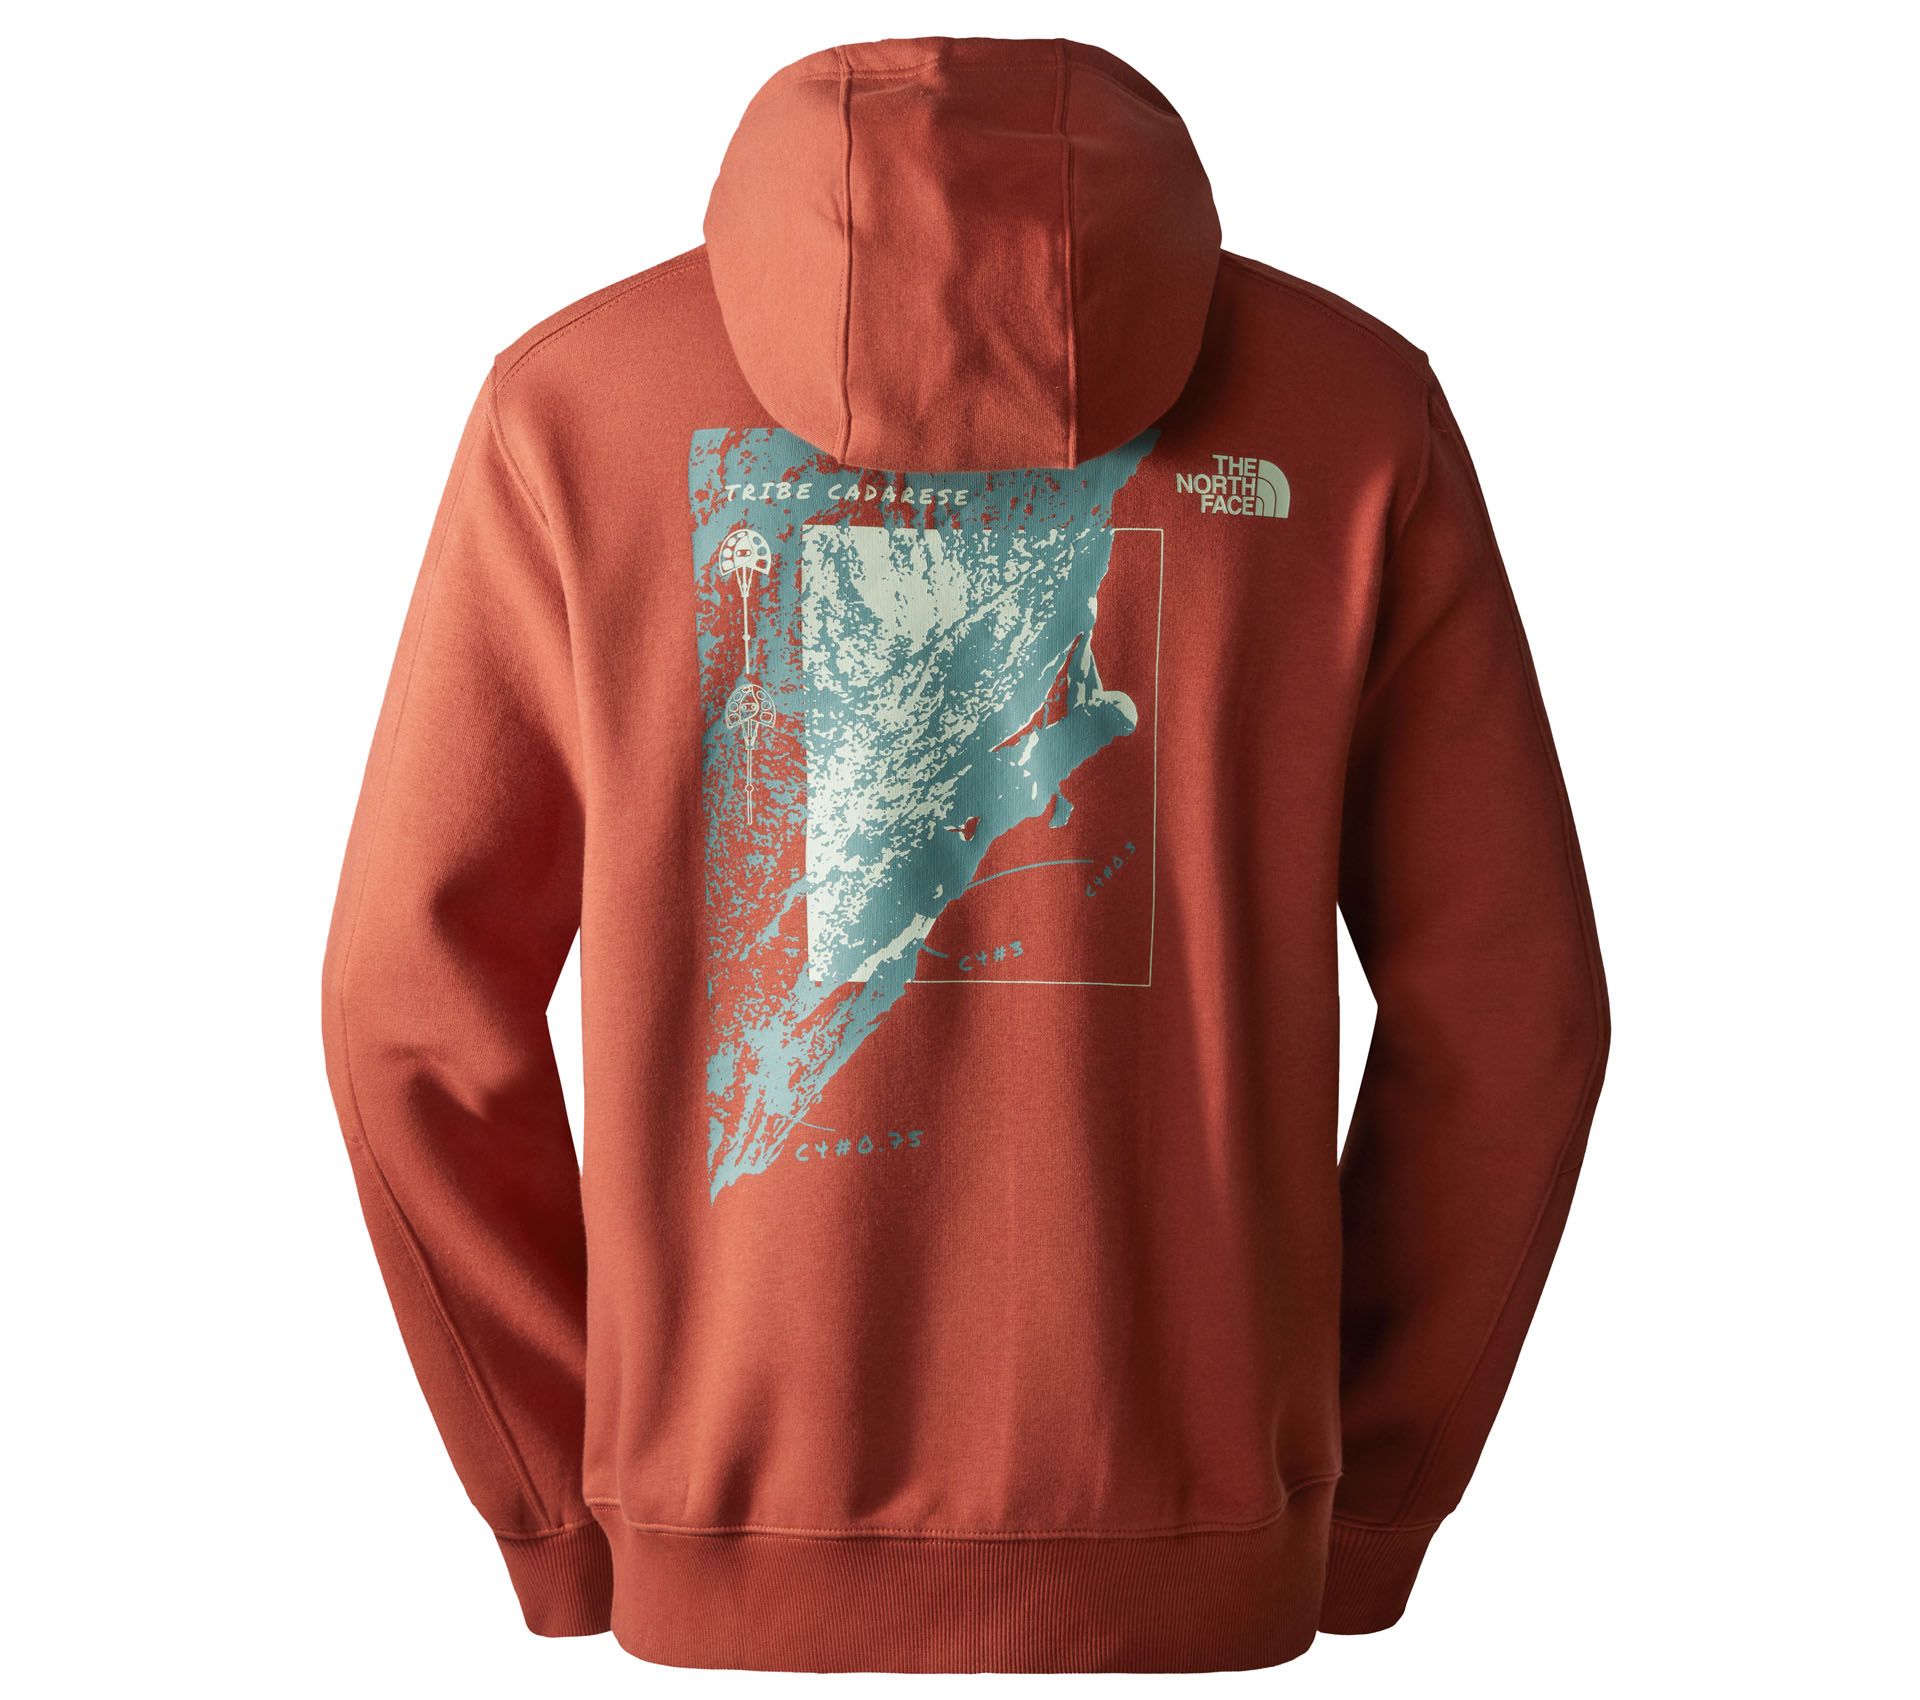 Image #1 of OUTDOOR GRAPHIC HOODIE